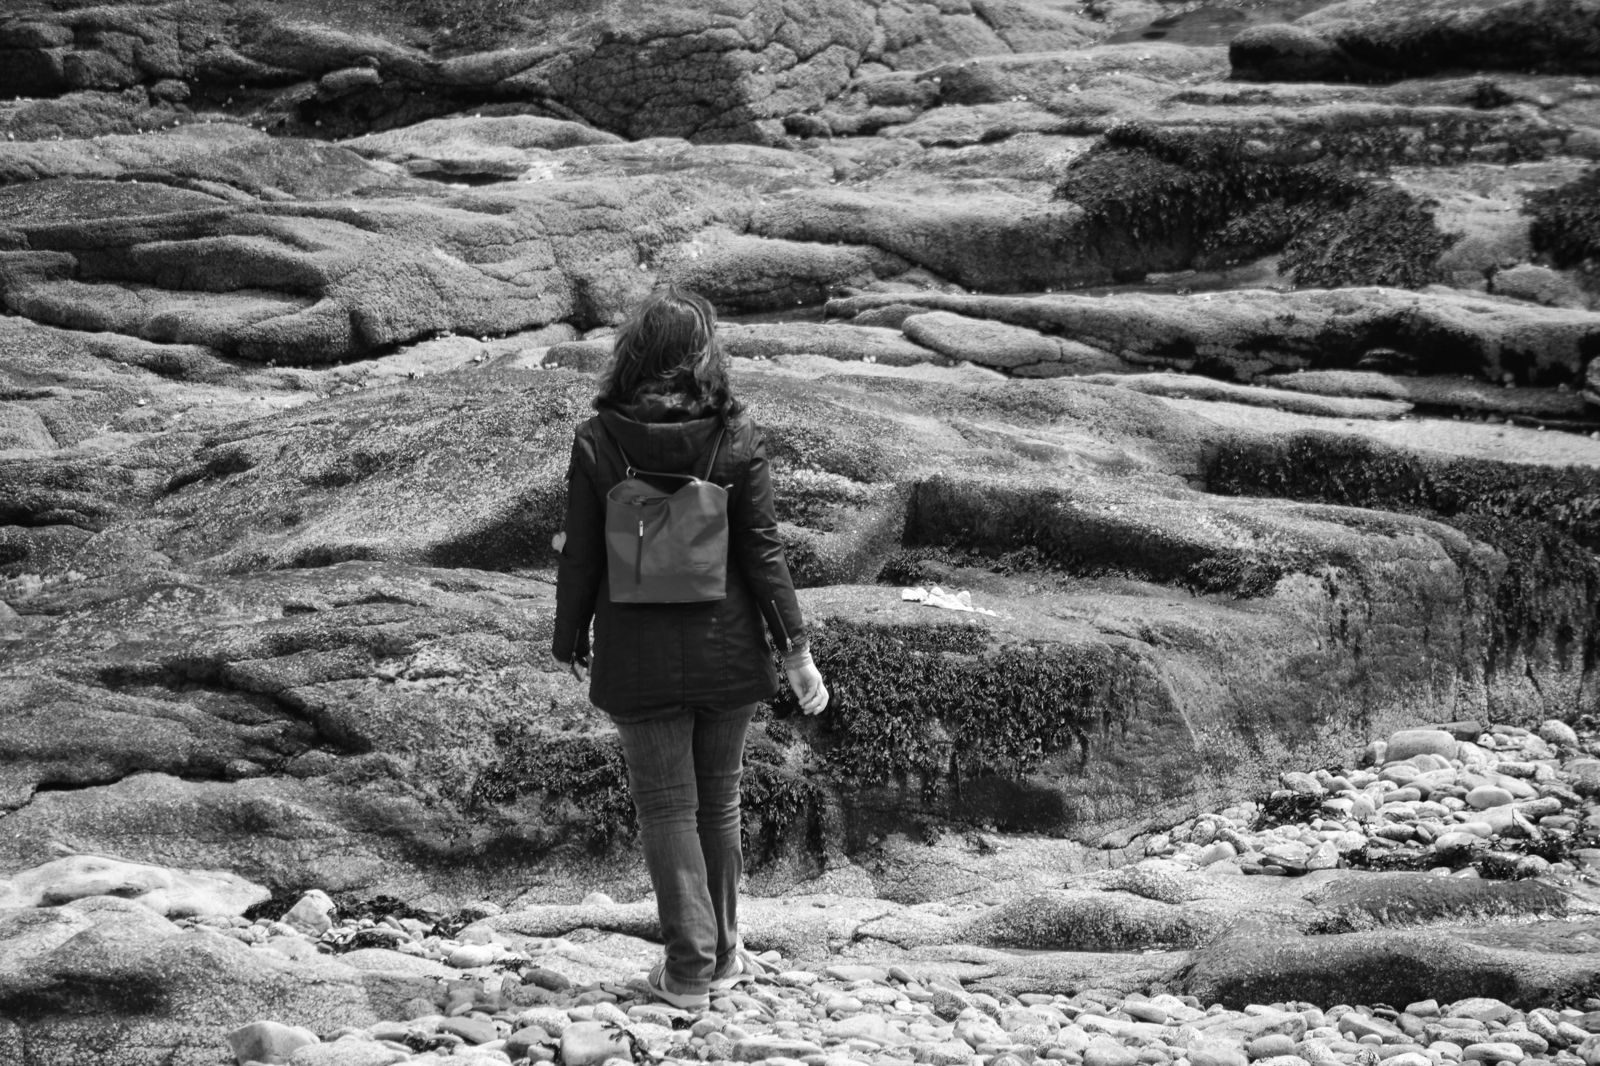 Girl Person Outdoors Black And White Rocks Travel Adult Park Wallpaper.com. Best High Quality Wallpaper